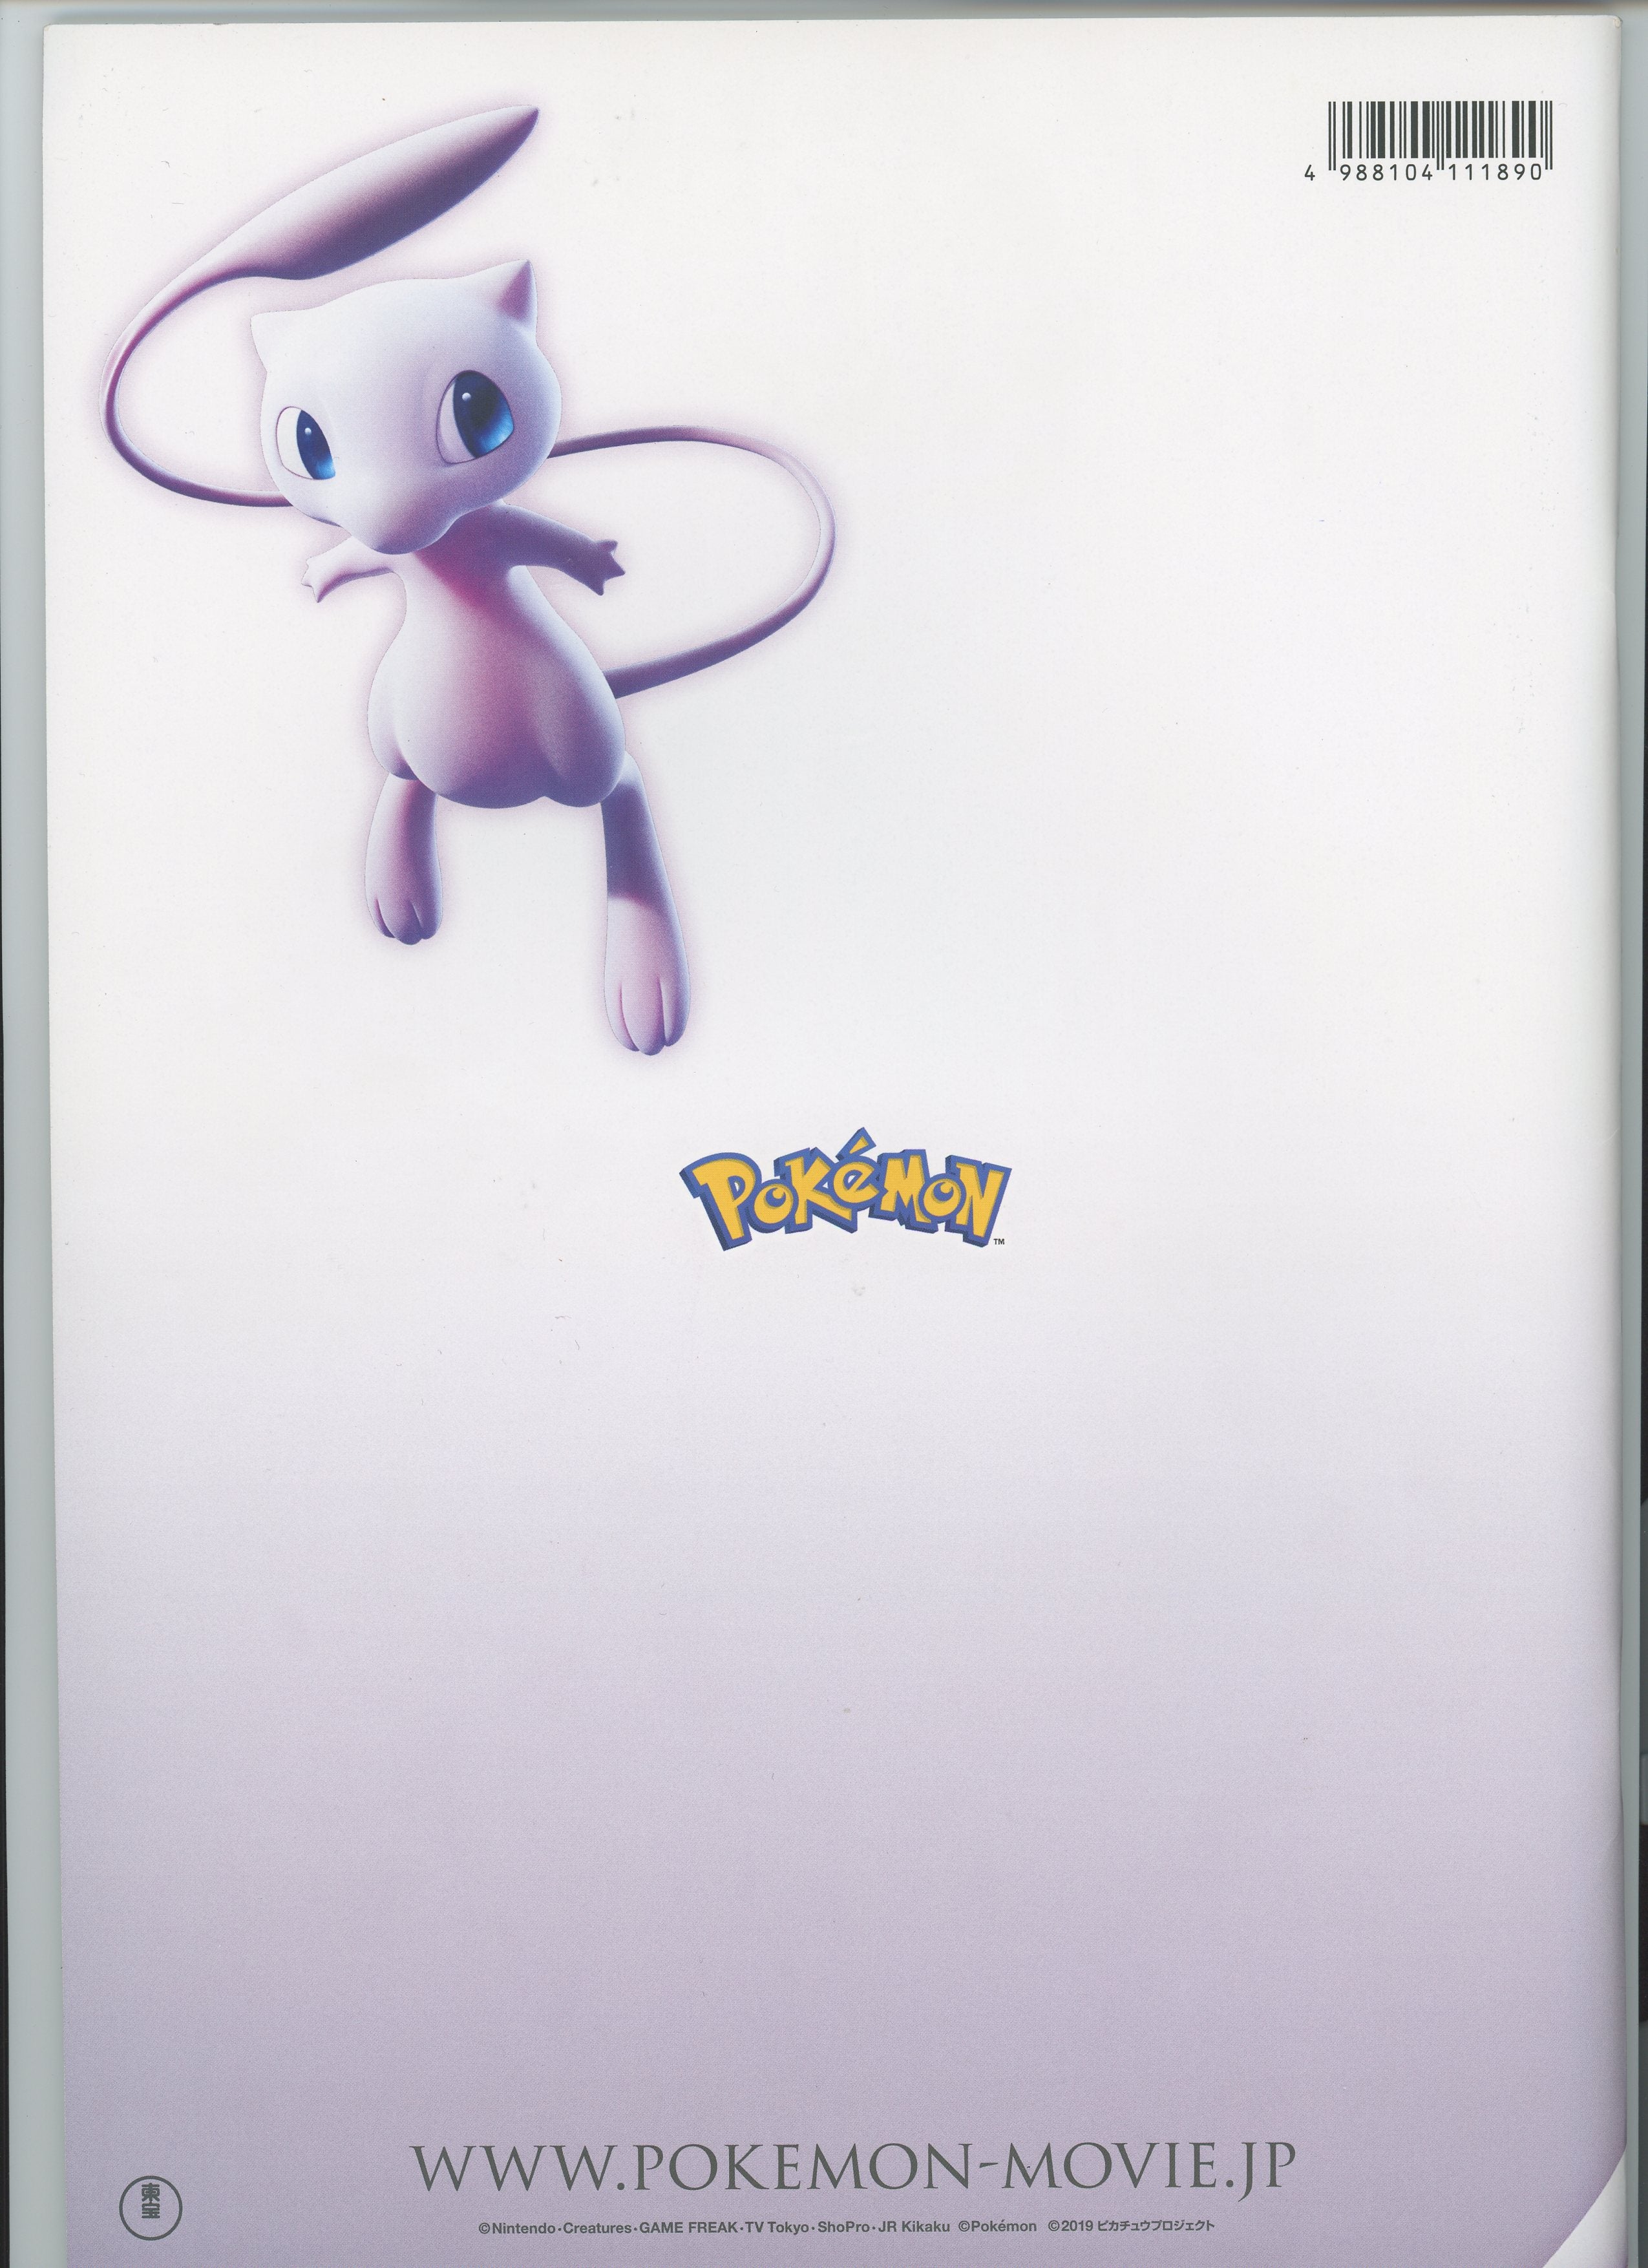 Japanese Pokémon - Mewtwo Strikes Back: Evolution Movie Pamphlet w/ Un-Numbered Promo Card (Ancient Mew) (2019)